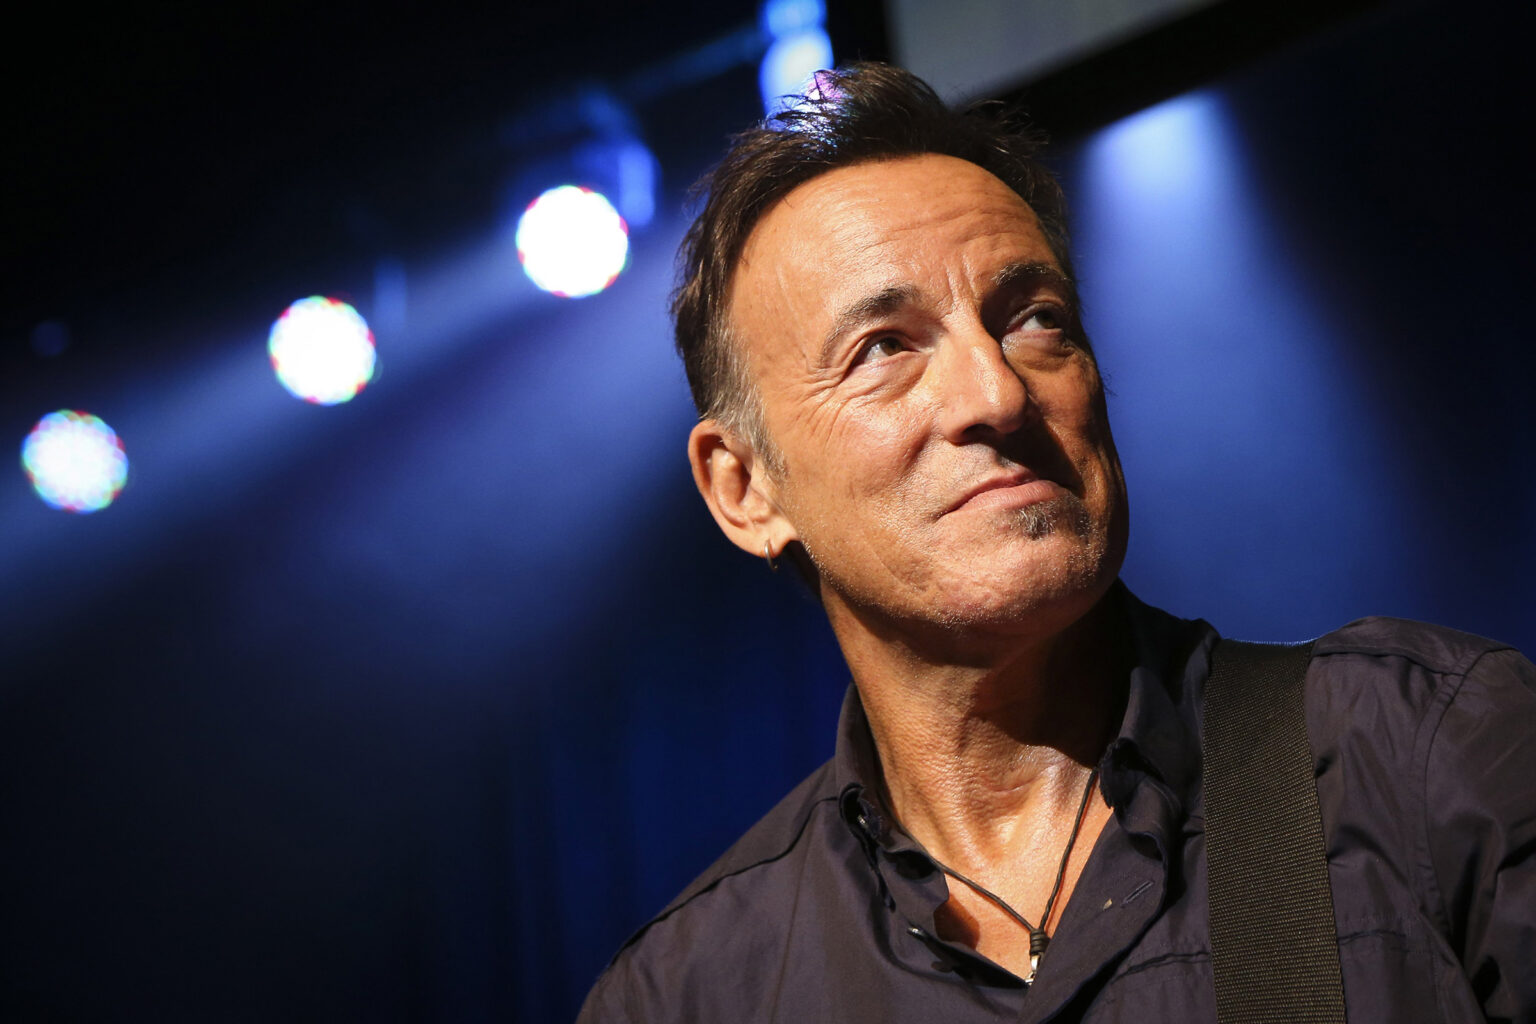 Bruce Springsteen was charged with a DUI, reckless driving, and more, but only had to deal with one charge. Find out if he used his net worth for freedom.